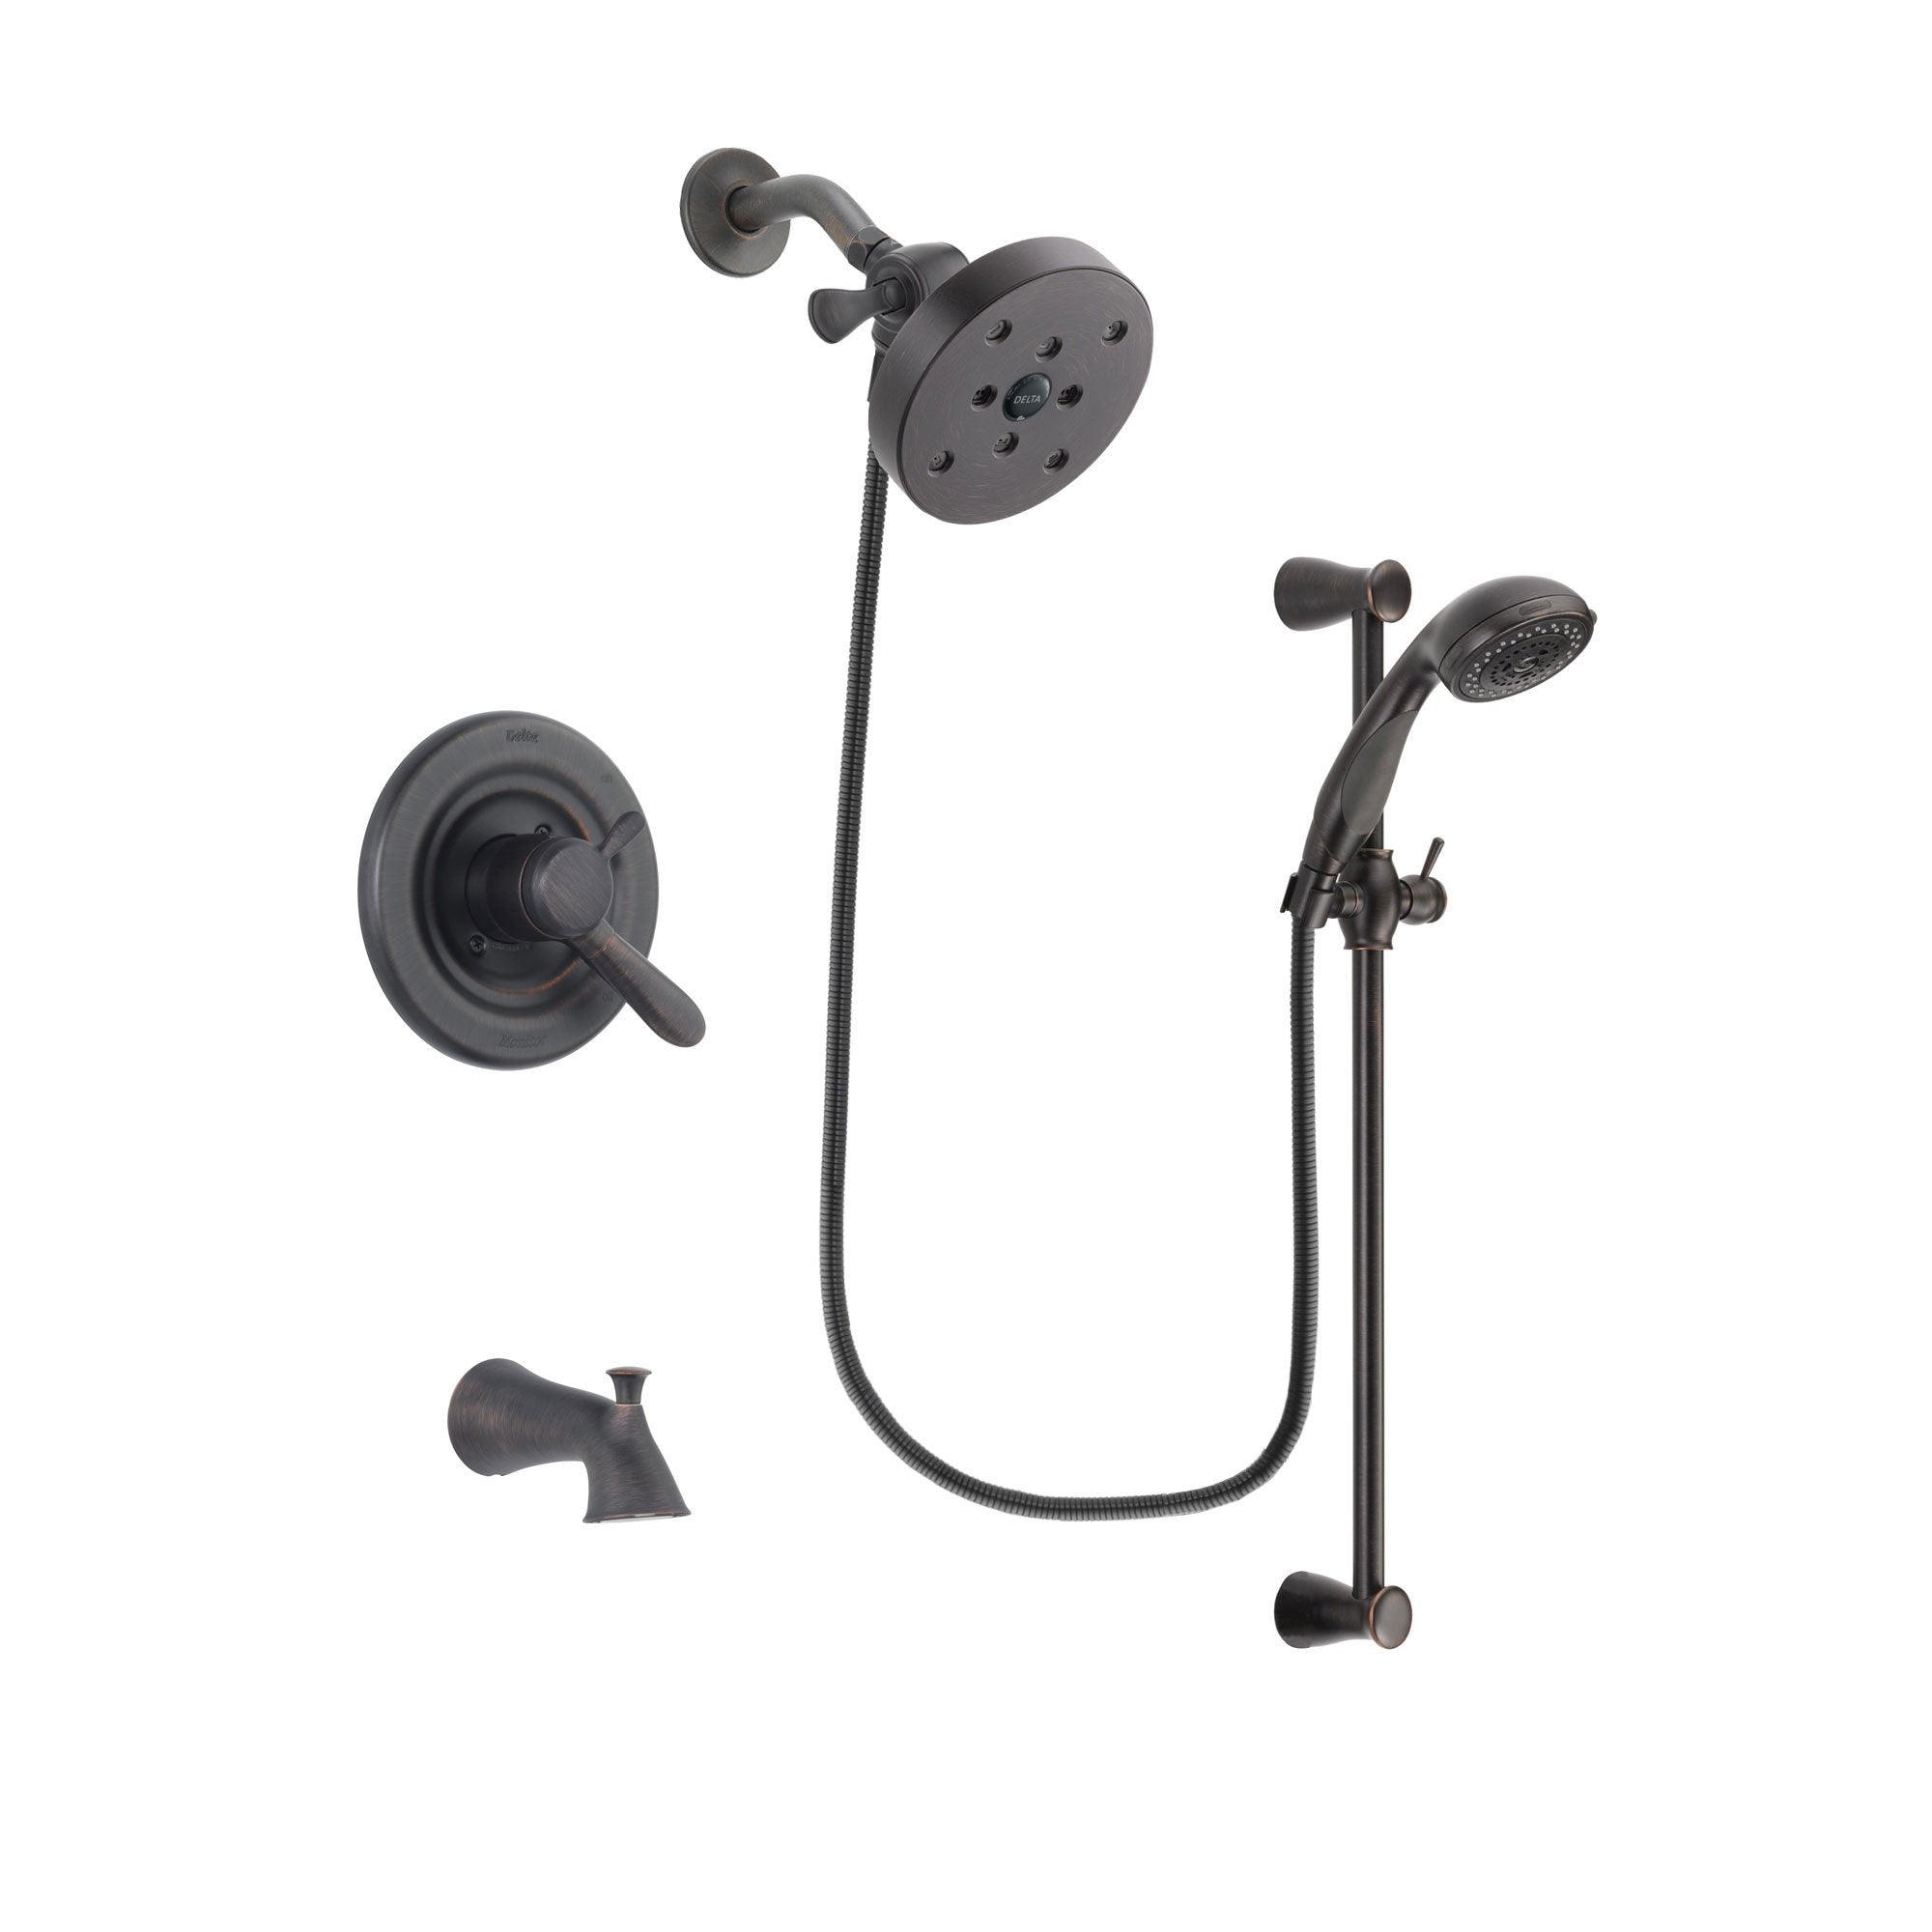 Delta Lahara Venetian Bronze Finish Dual Control Tub and Shower Faucet System Package with 5-1/2 inch Showerhead and Personal Handheld Shower Spray with Slide Bar Includes Rough-in Valve and Tub Spout DSP2729V